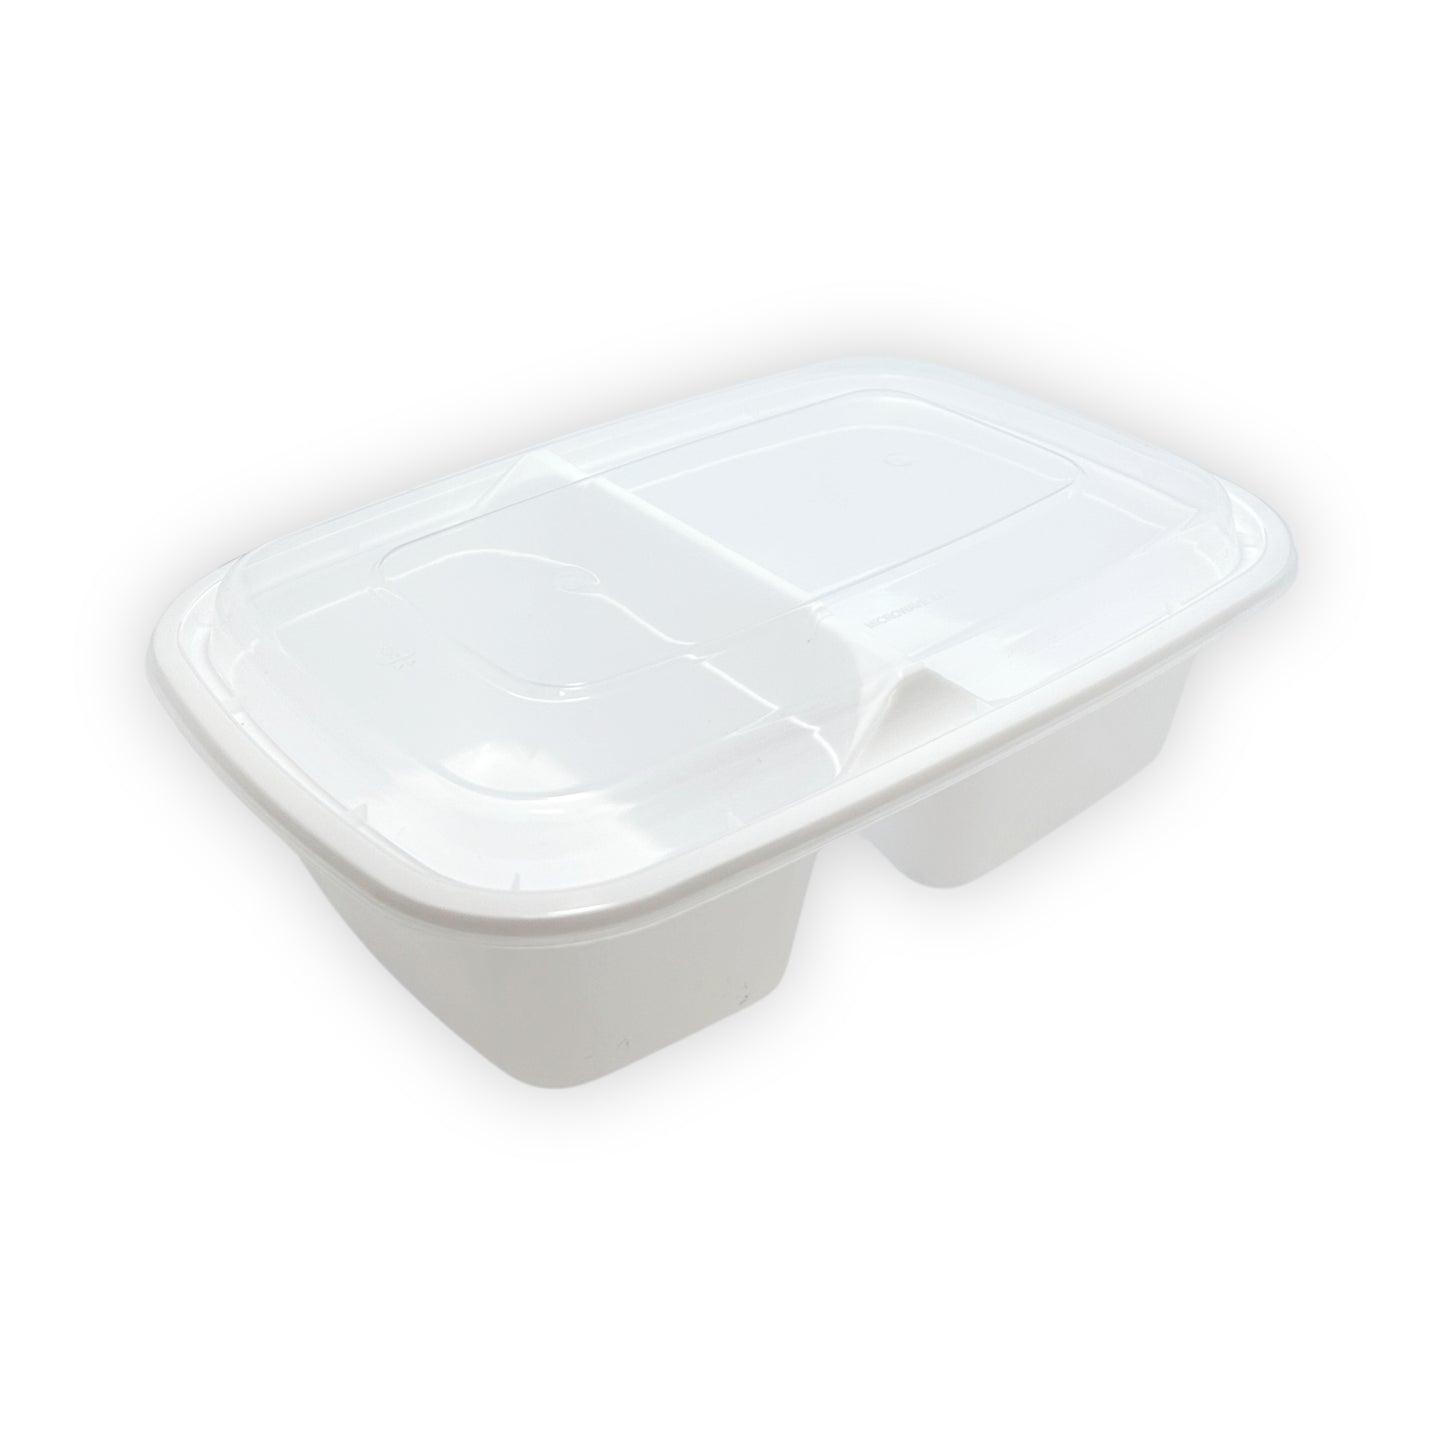 KIS-KY238G | 150sets 38oz, 1124ml 2-Compartment White PP Rectangle Container with Clear Lids Combo; $0.281/set